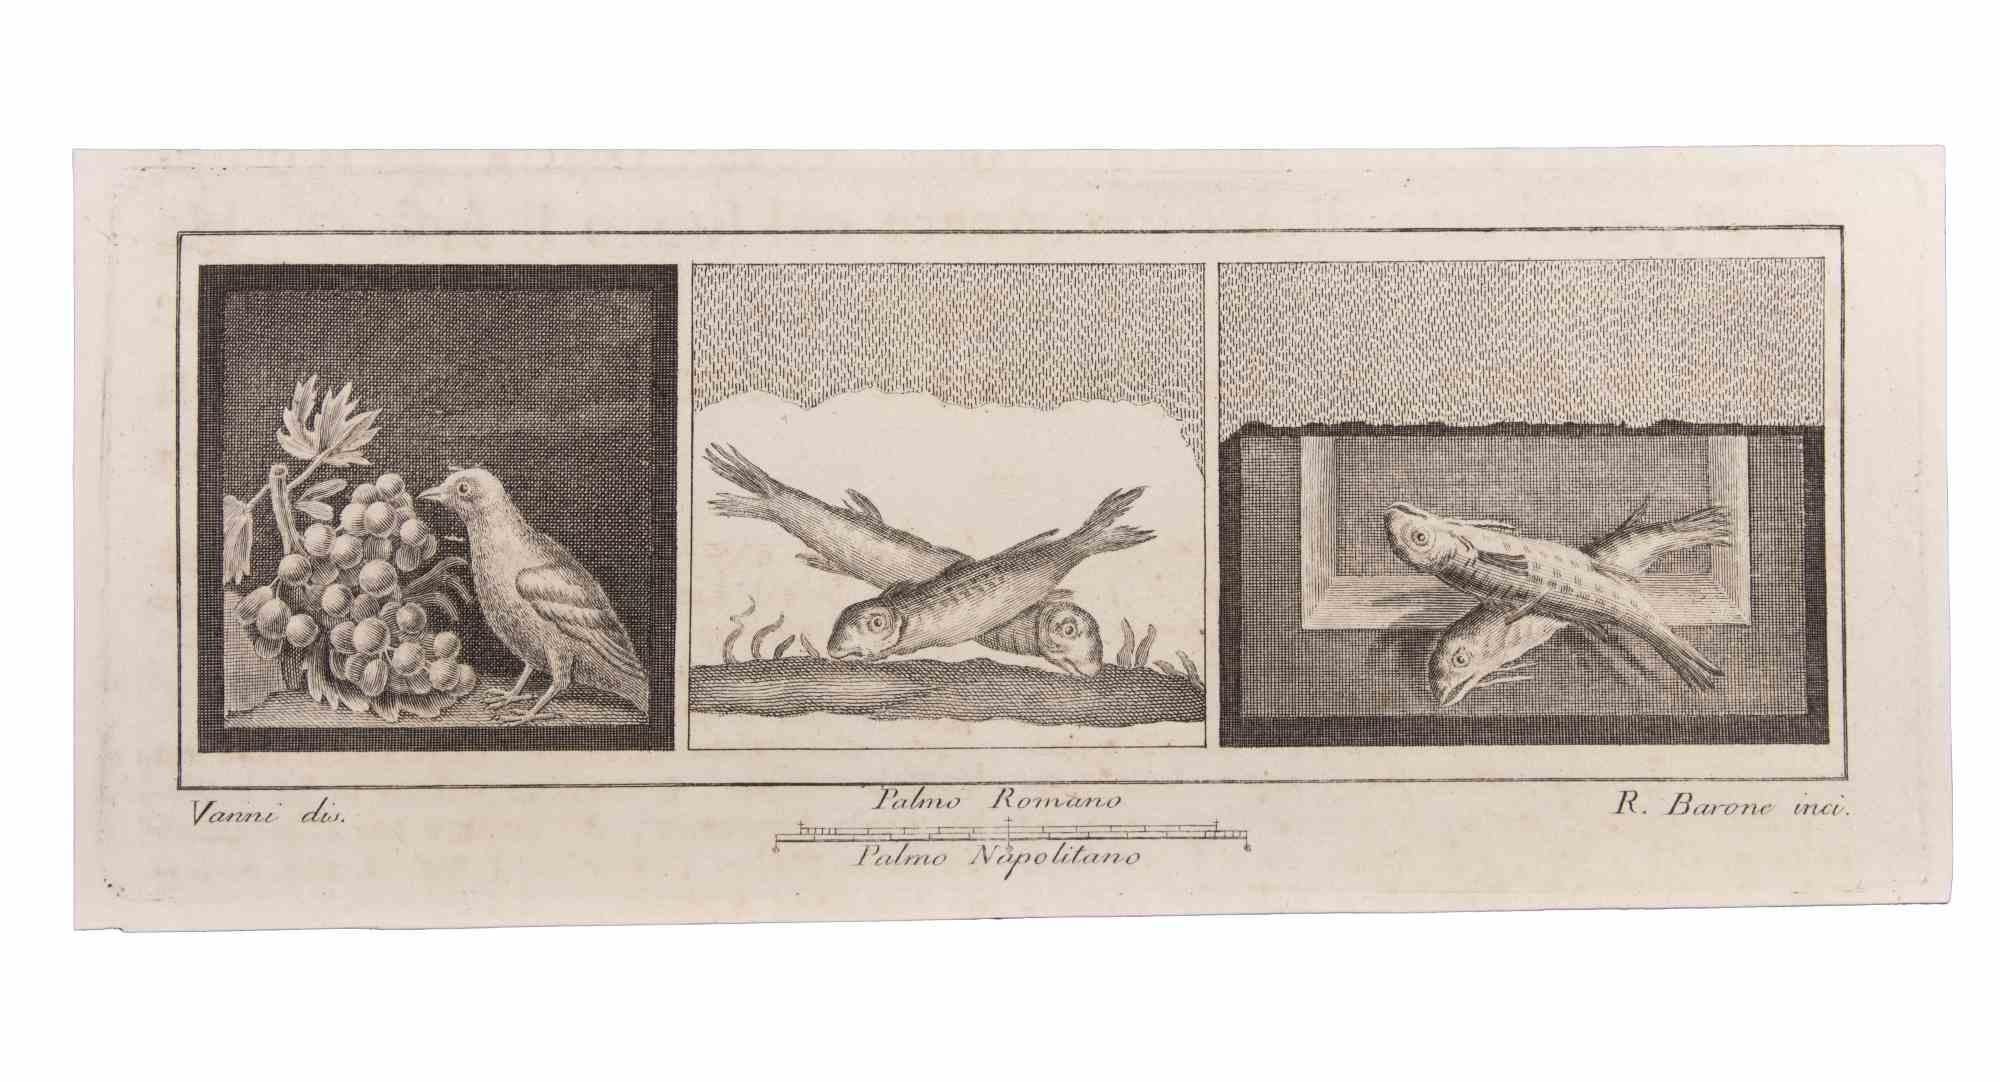 Decoration With Animals is an Etching realized by Raffaele Barone (18th century).

The etching belongs to the print suite “Antiquities of Herculaneum Exposed” (original title: “Le Antichità di Ercolano Esposte”), an eight-volume volume of engravings